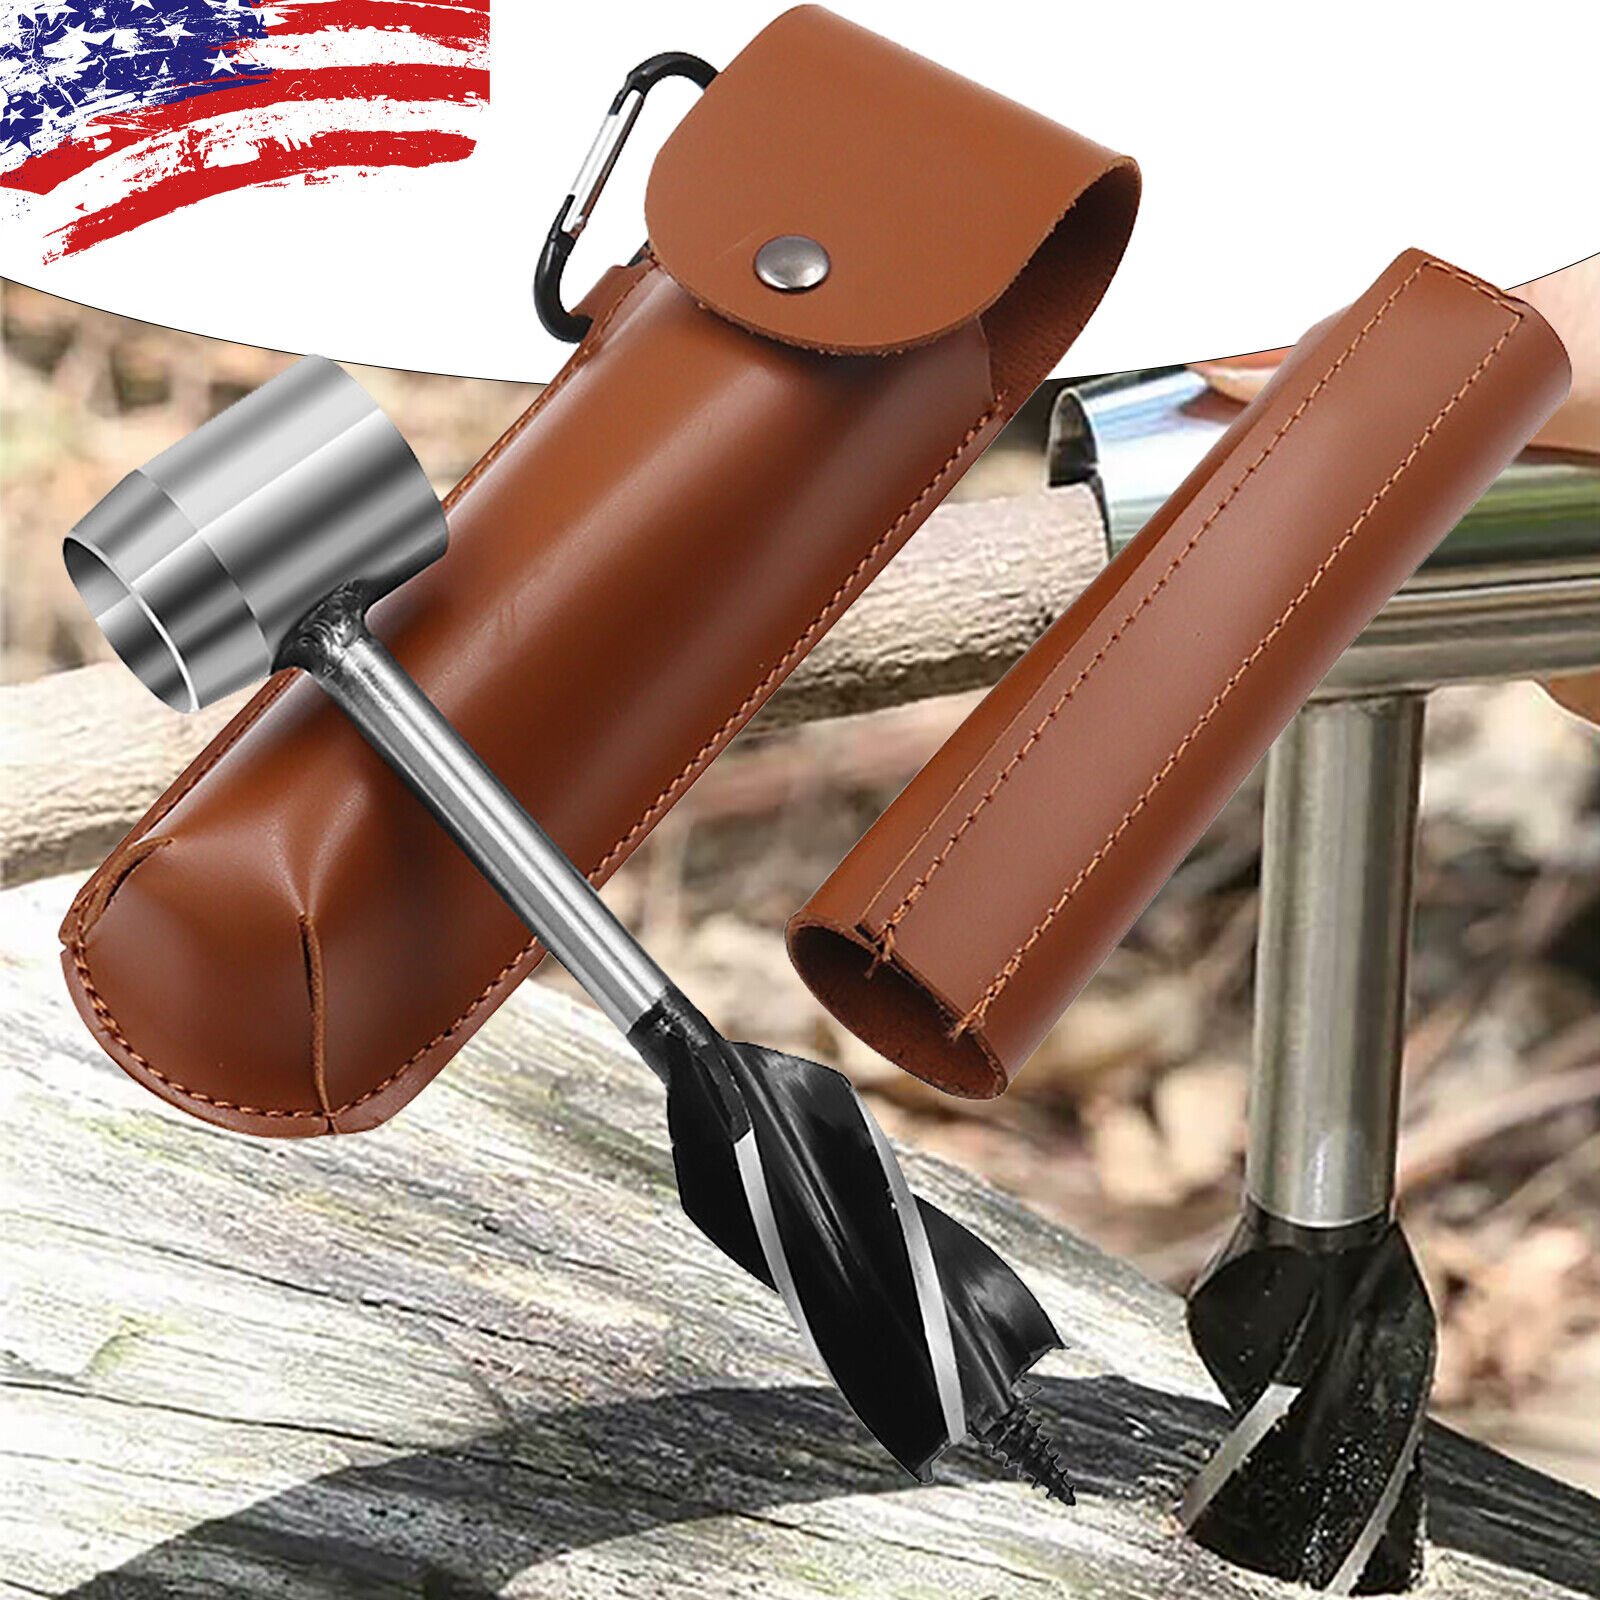 Manual Hand Auger Wrench Outdoor Survival Wood Gear Drill Kit for Bushcraft Tool